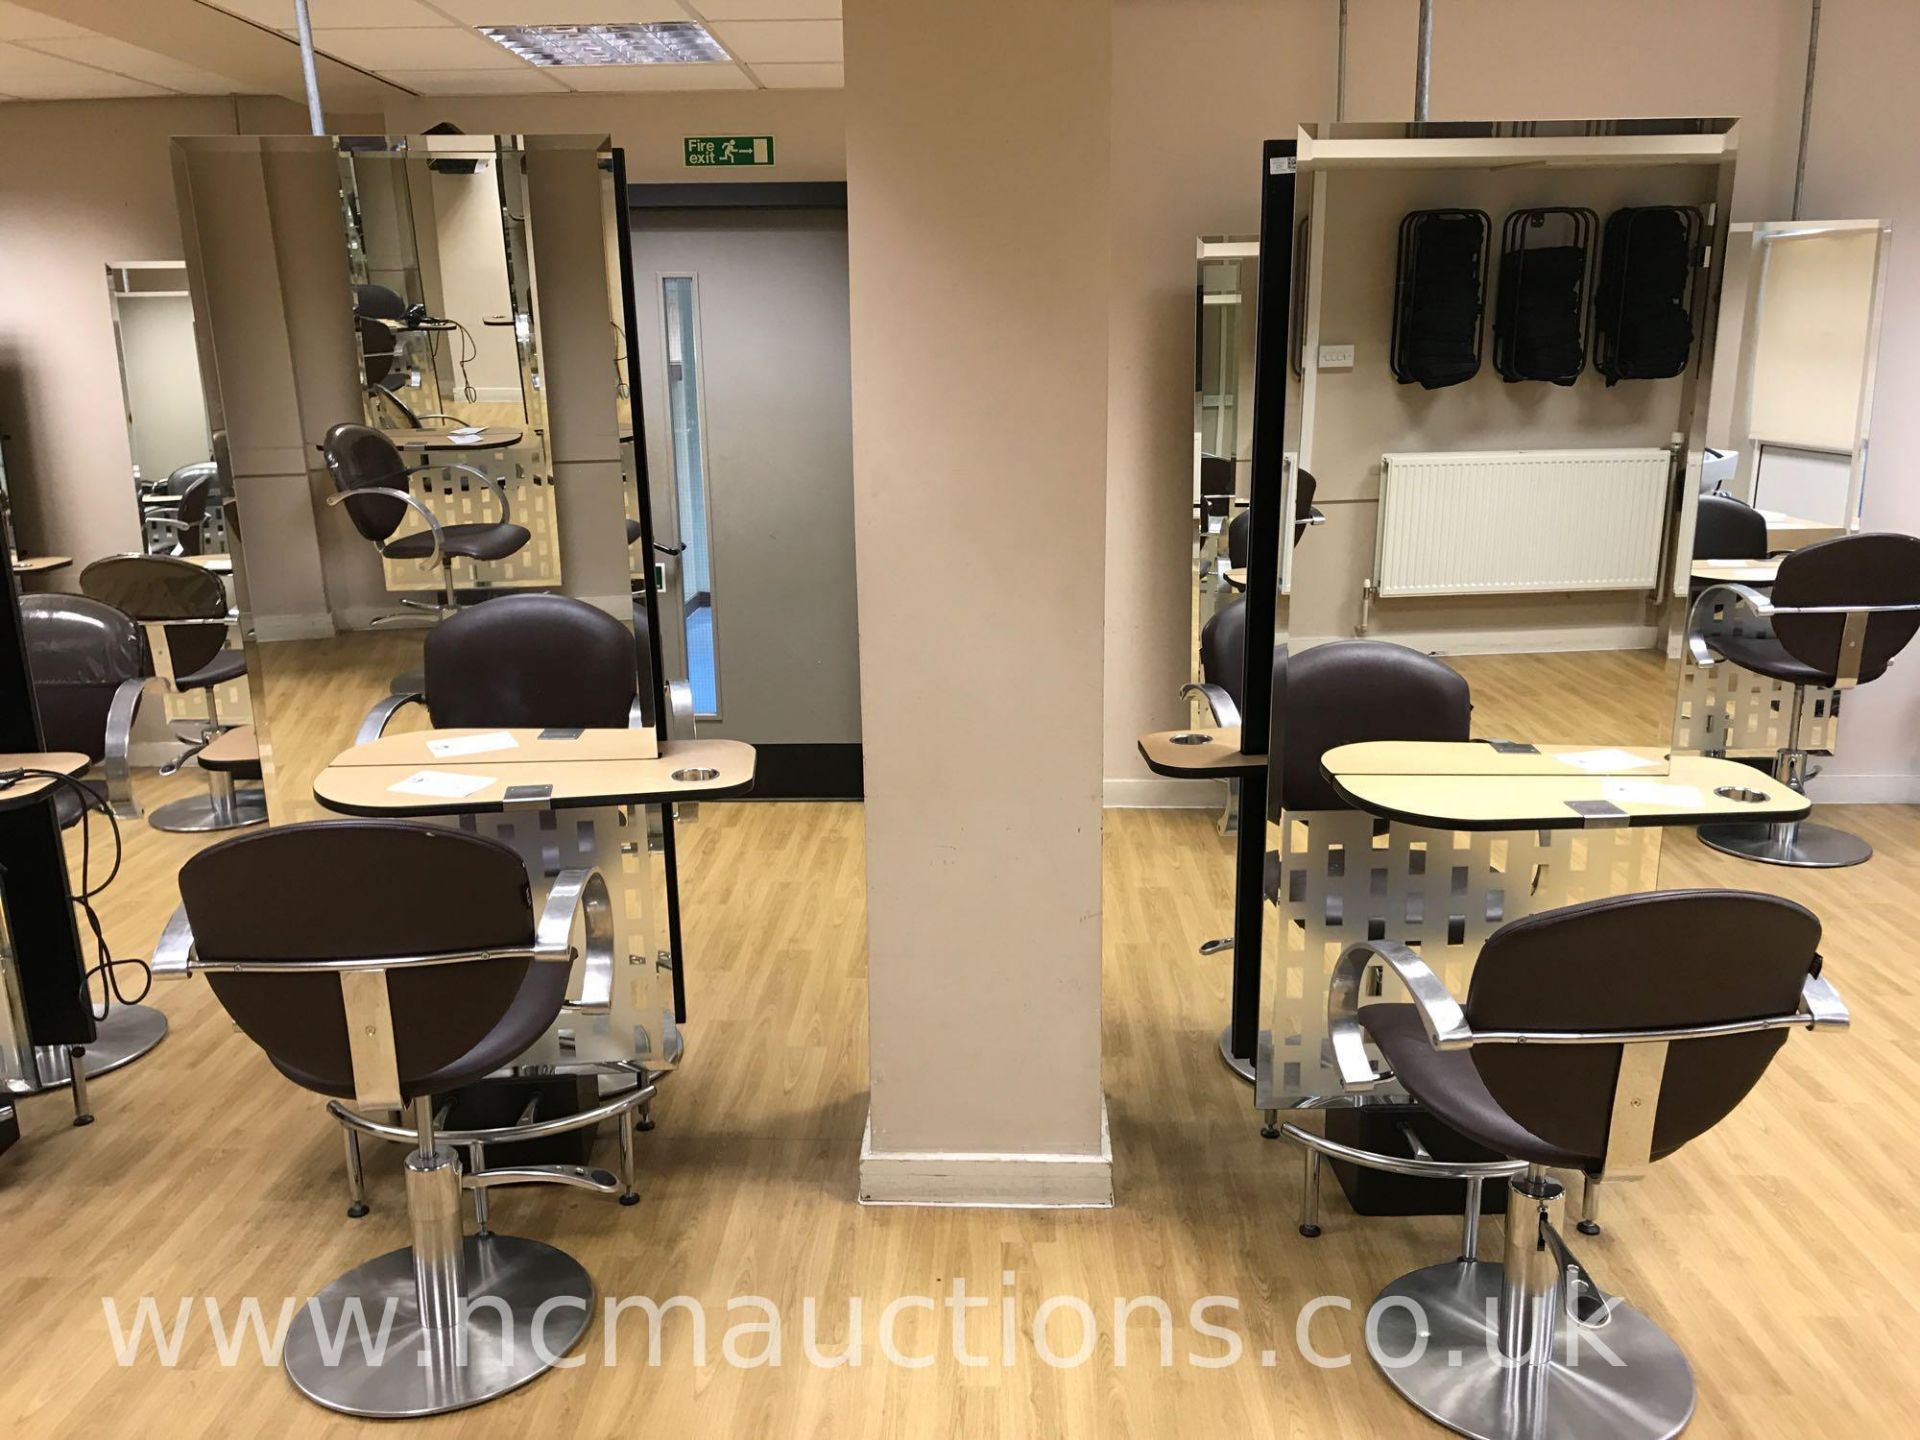 2x Double Side Hair and Beauty Station